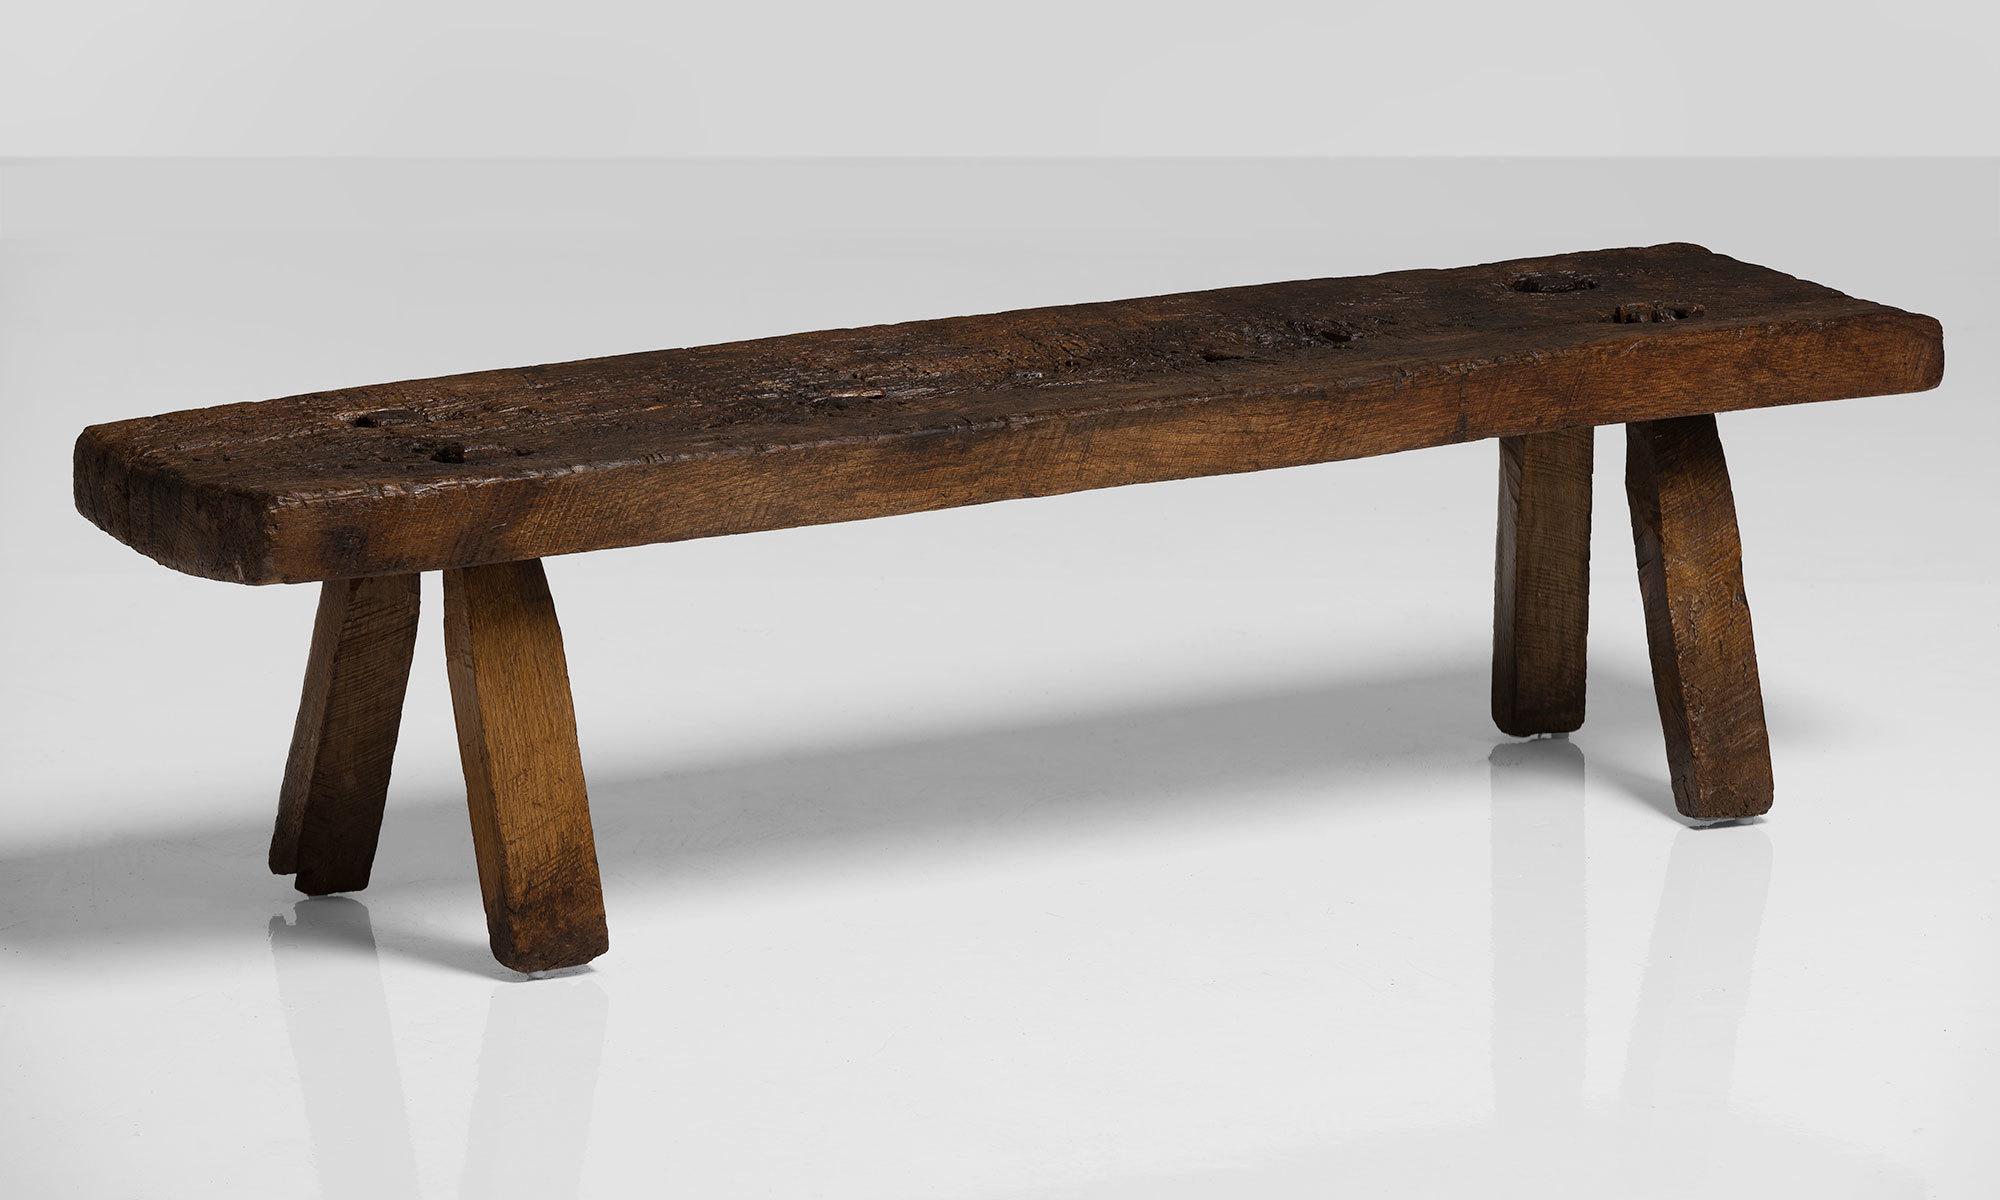 Oak Pig Bench, England circa 1790.

Primitive form with substantial slab top and legs.